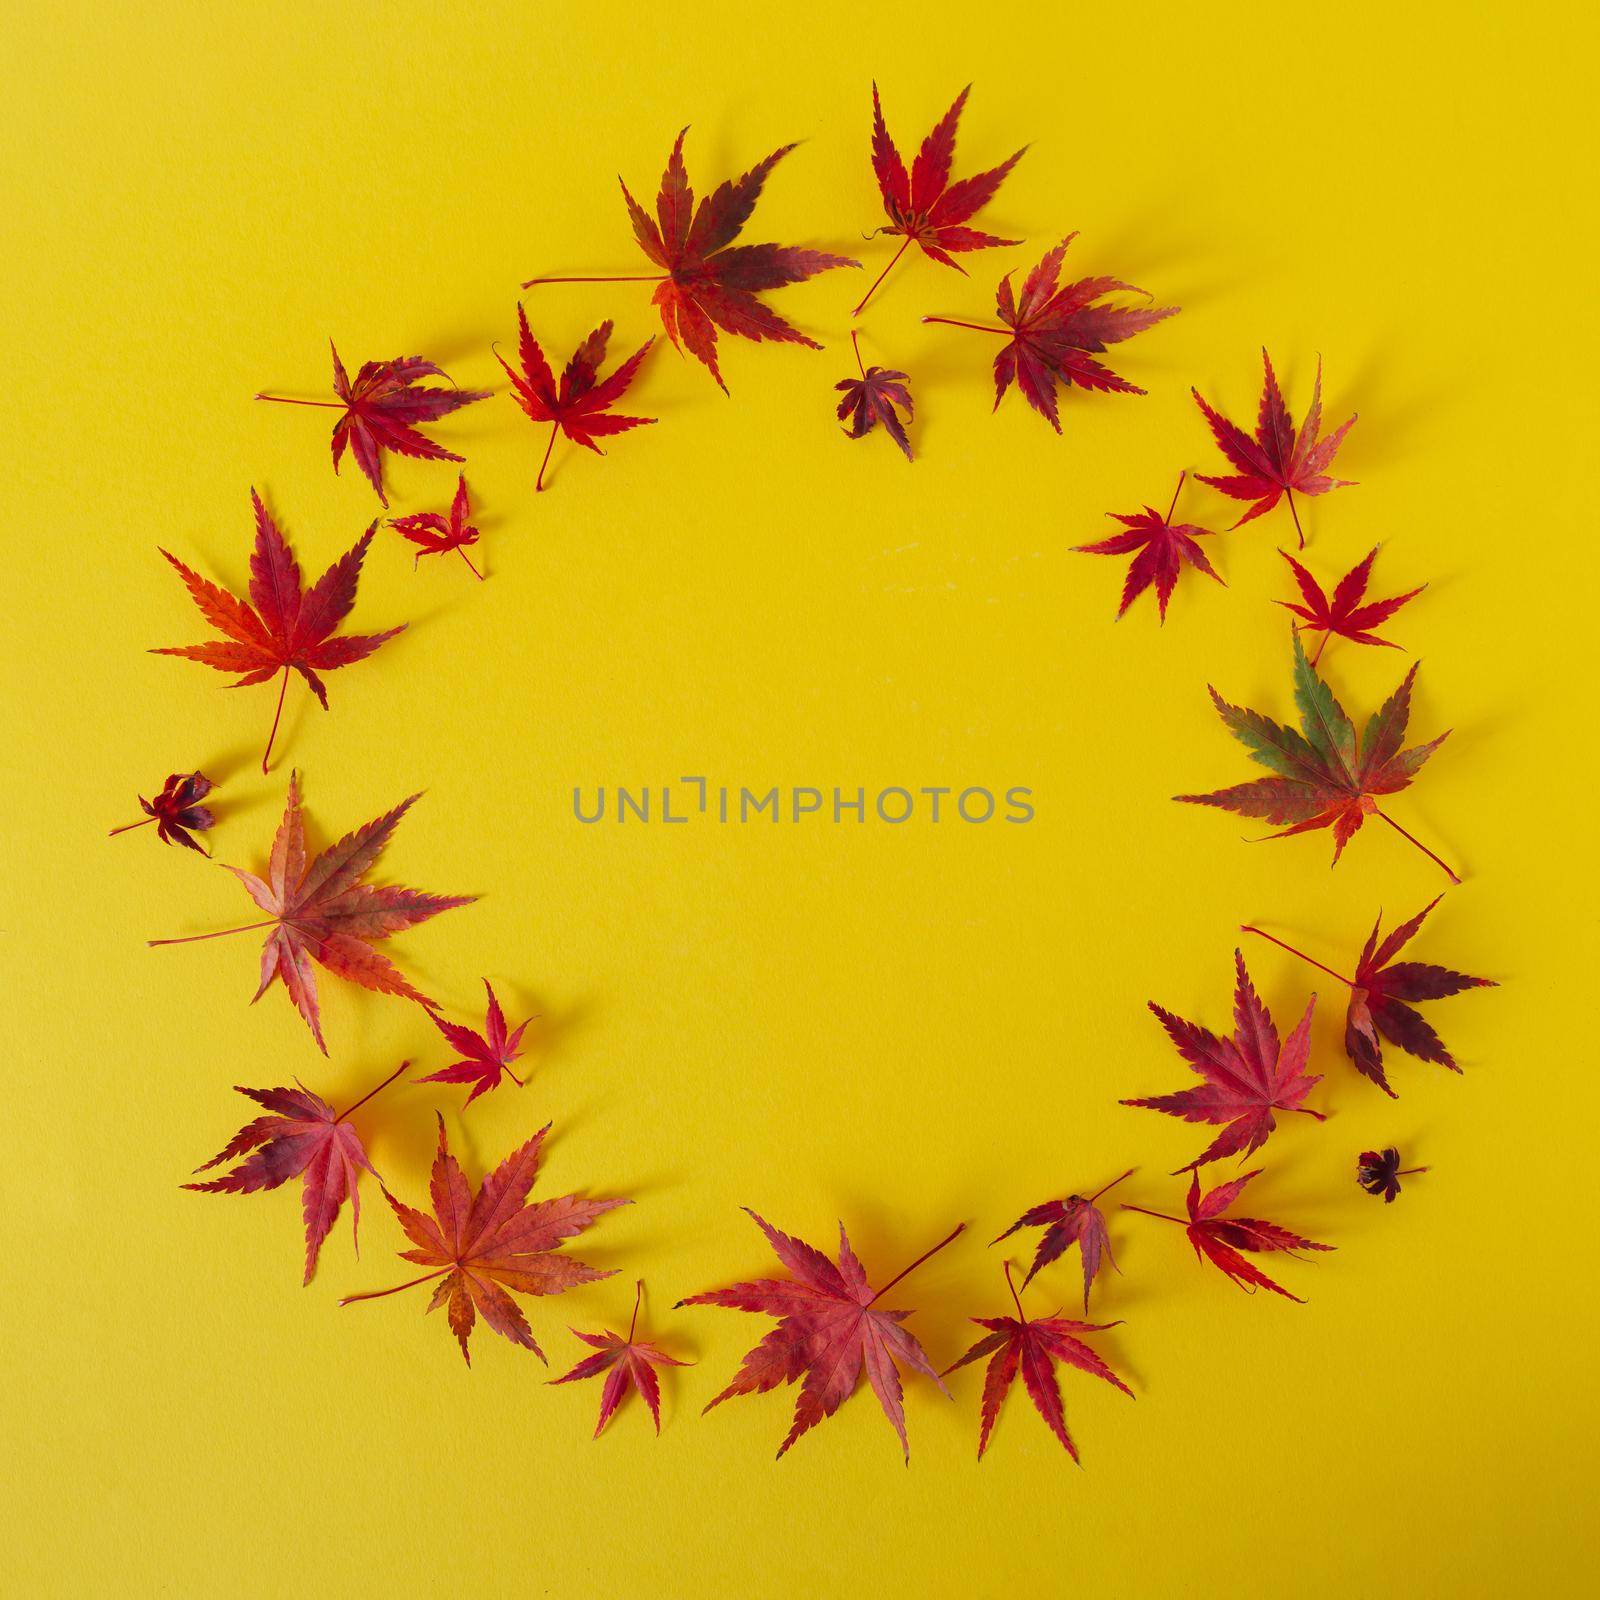 outumn bright leaves on yellow background in round shape. creative concept